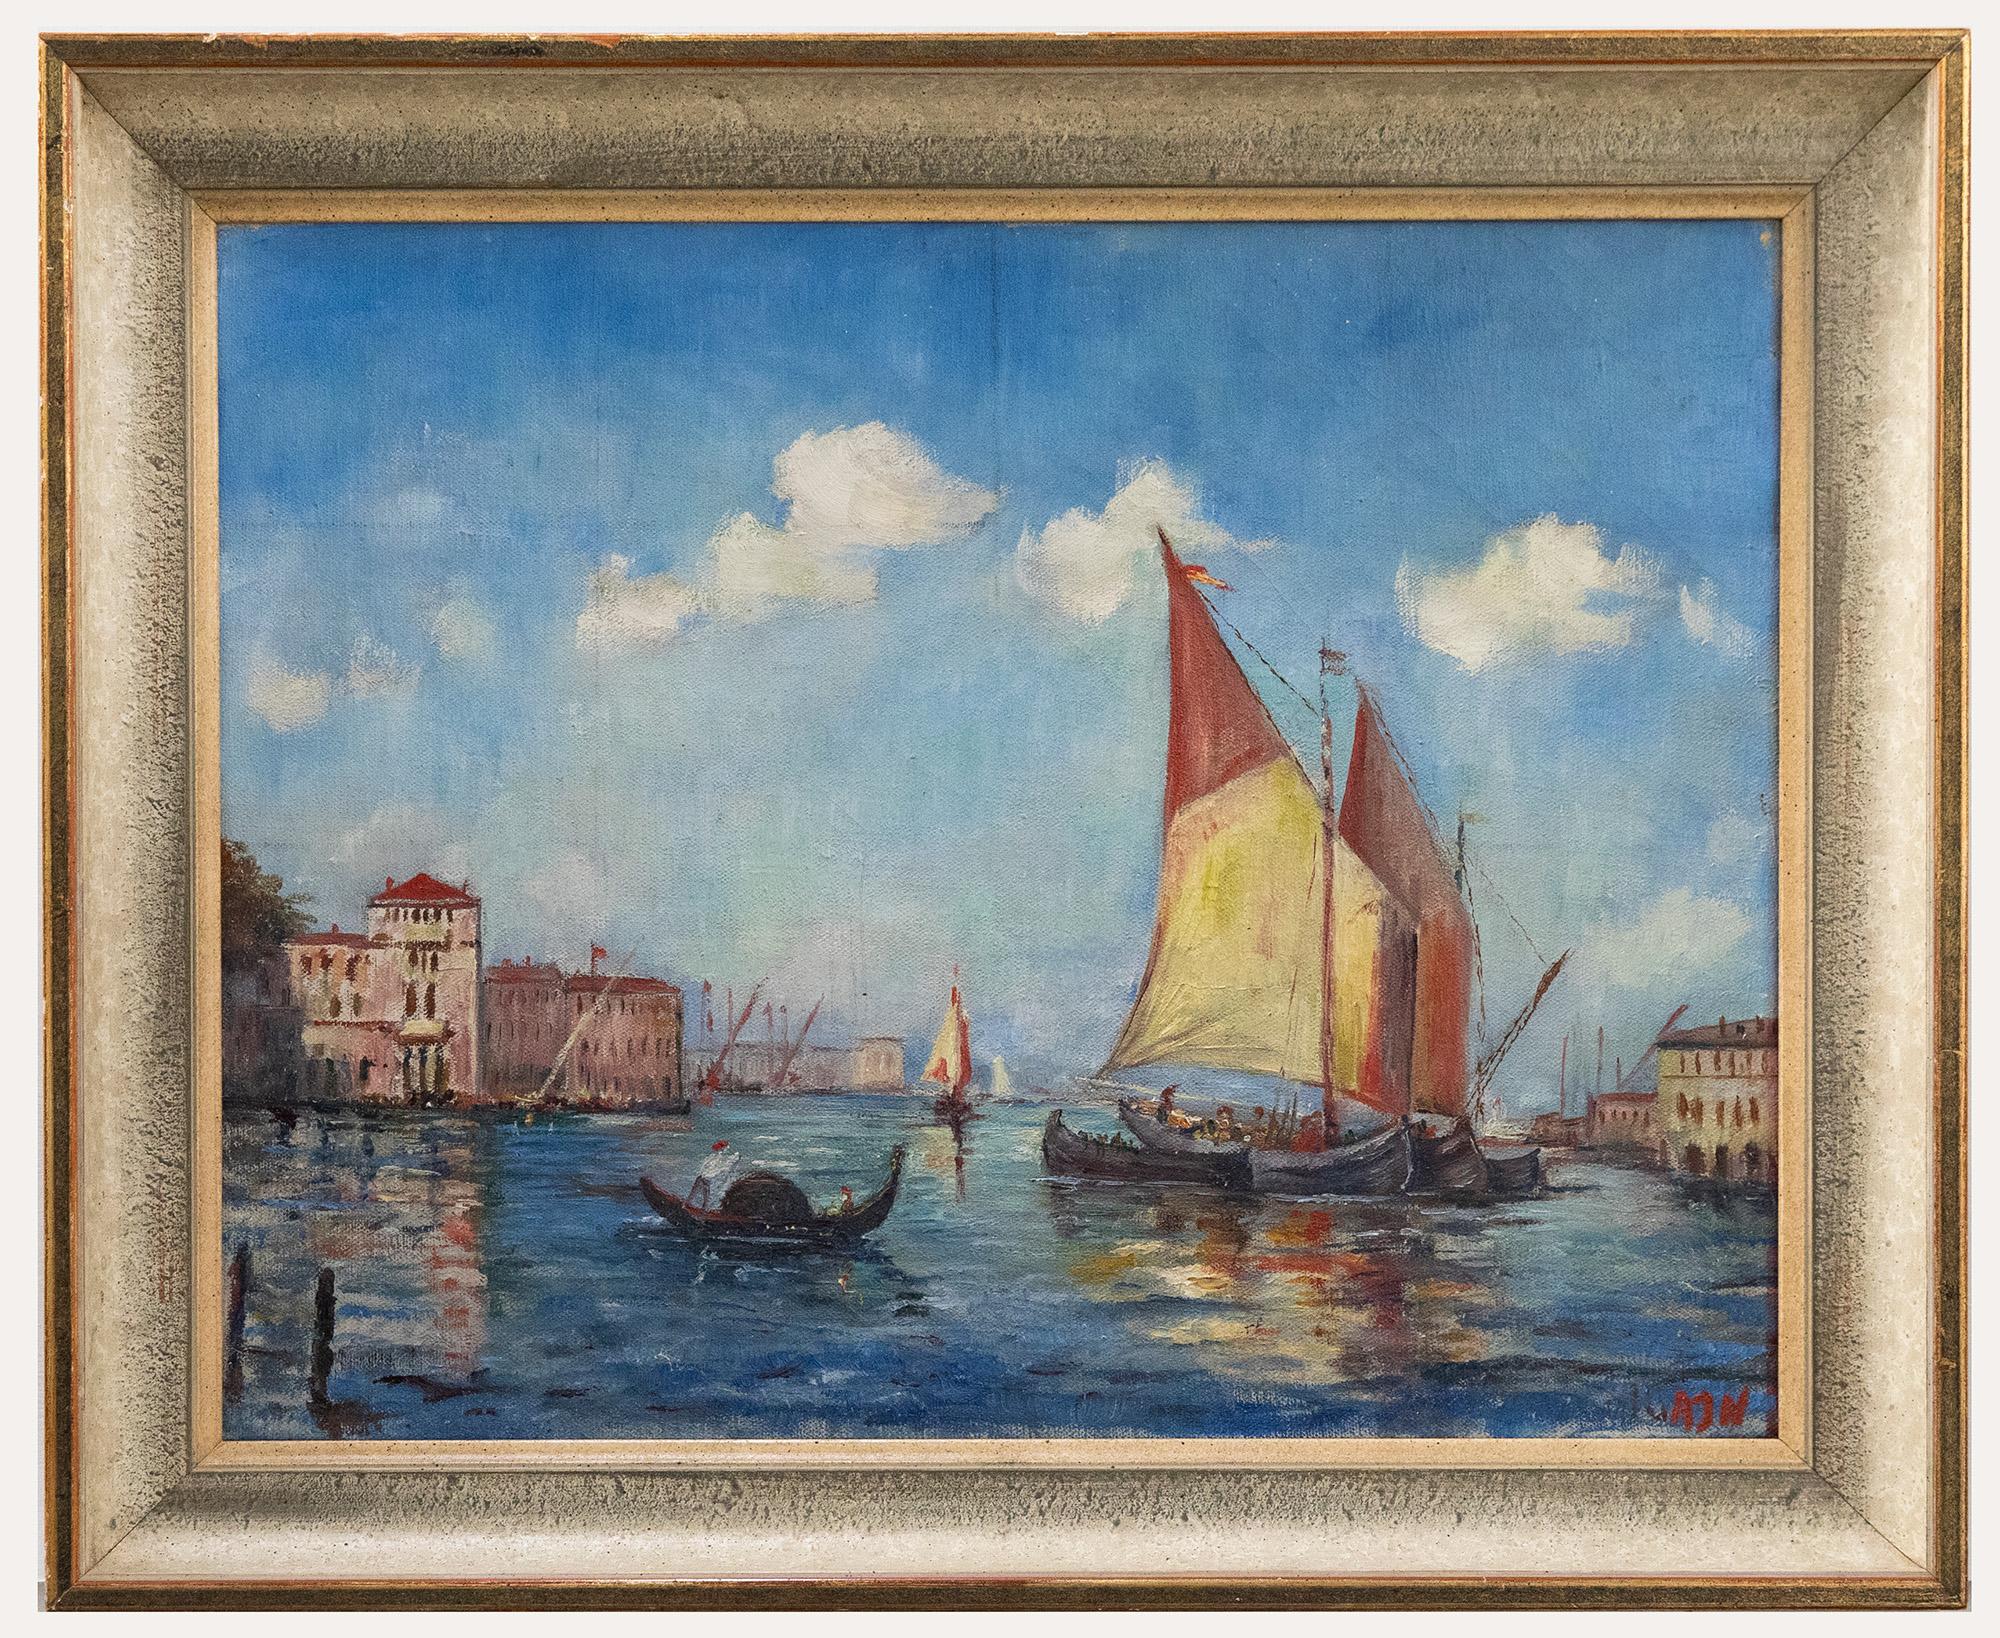 Unknown Landscape Painting - A.J.N - Framed 20th Century Oil, Colour on the Grand Canal